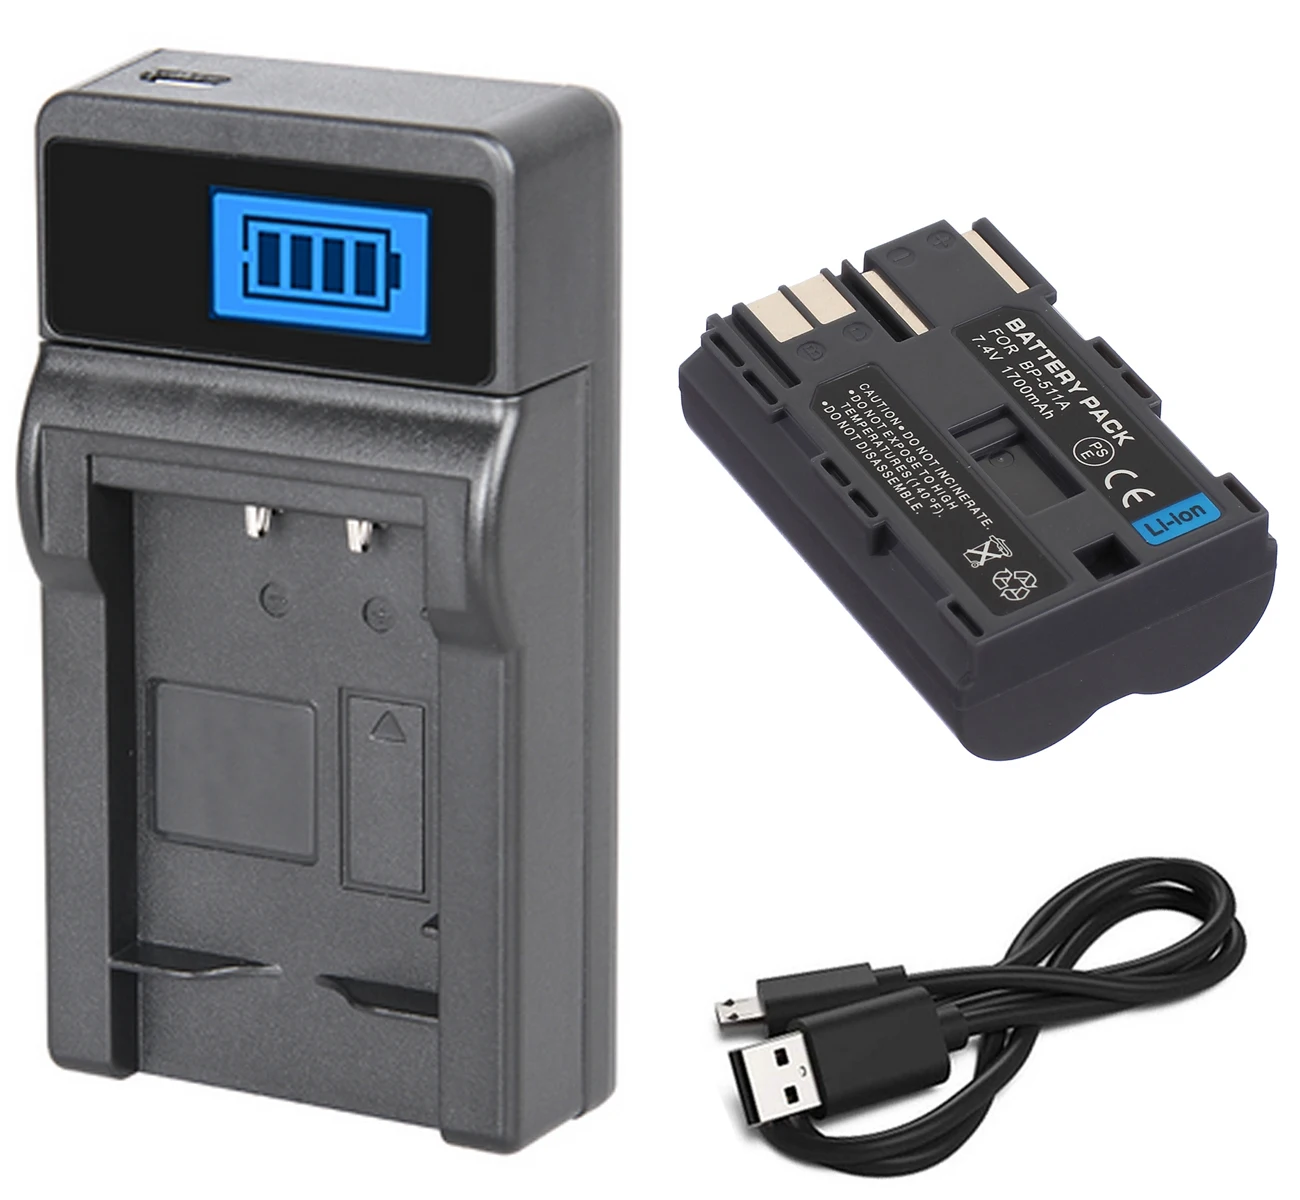 

Battery Pack + Charger for Canon BP-508, BP-511A, BP511A, BP-511, BP511, BP-512, BP512, BP-512A, BP-514 Rechargeable Lithium-ion